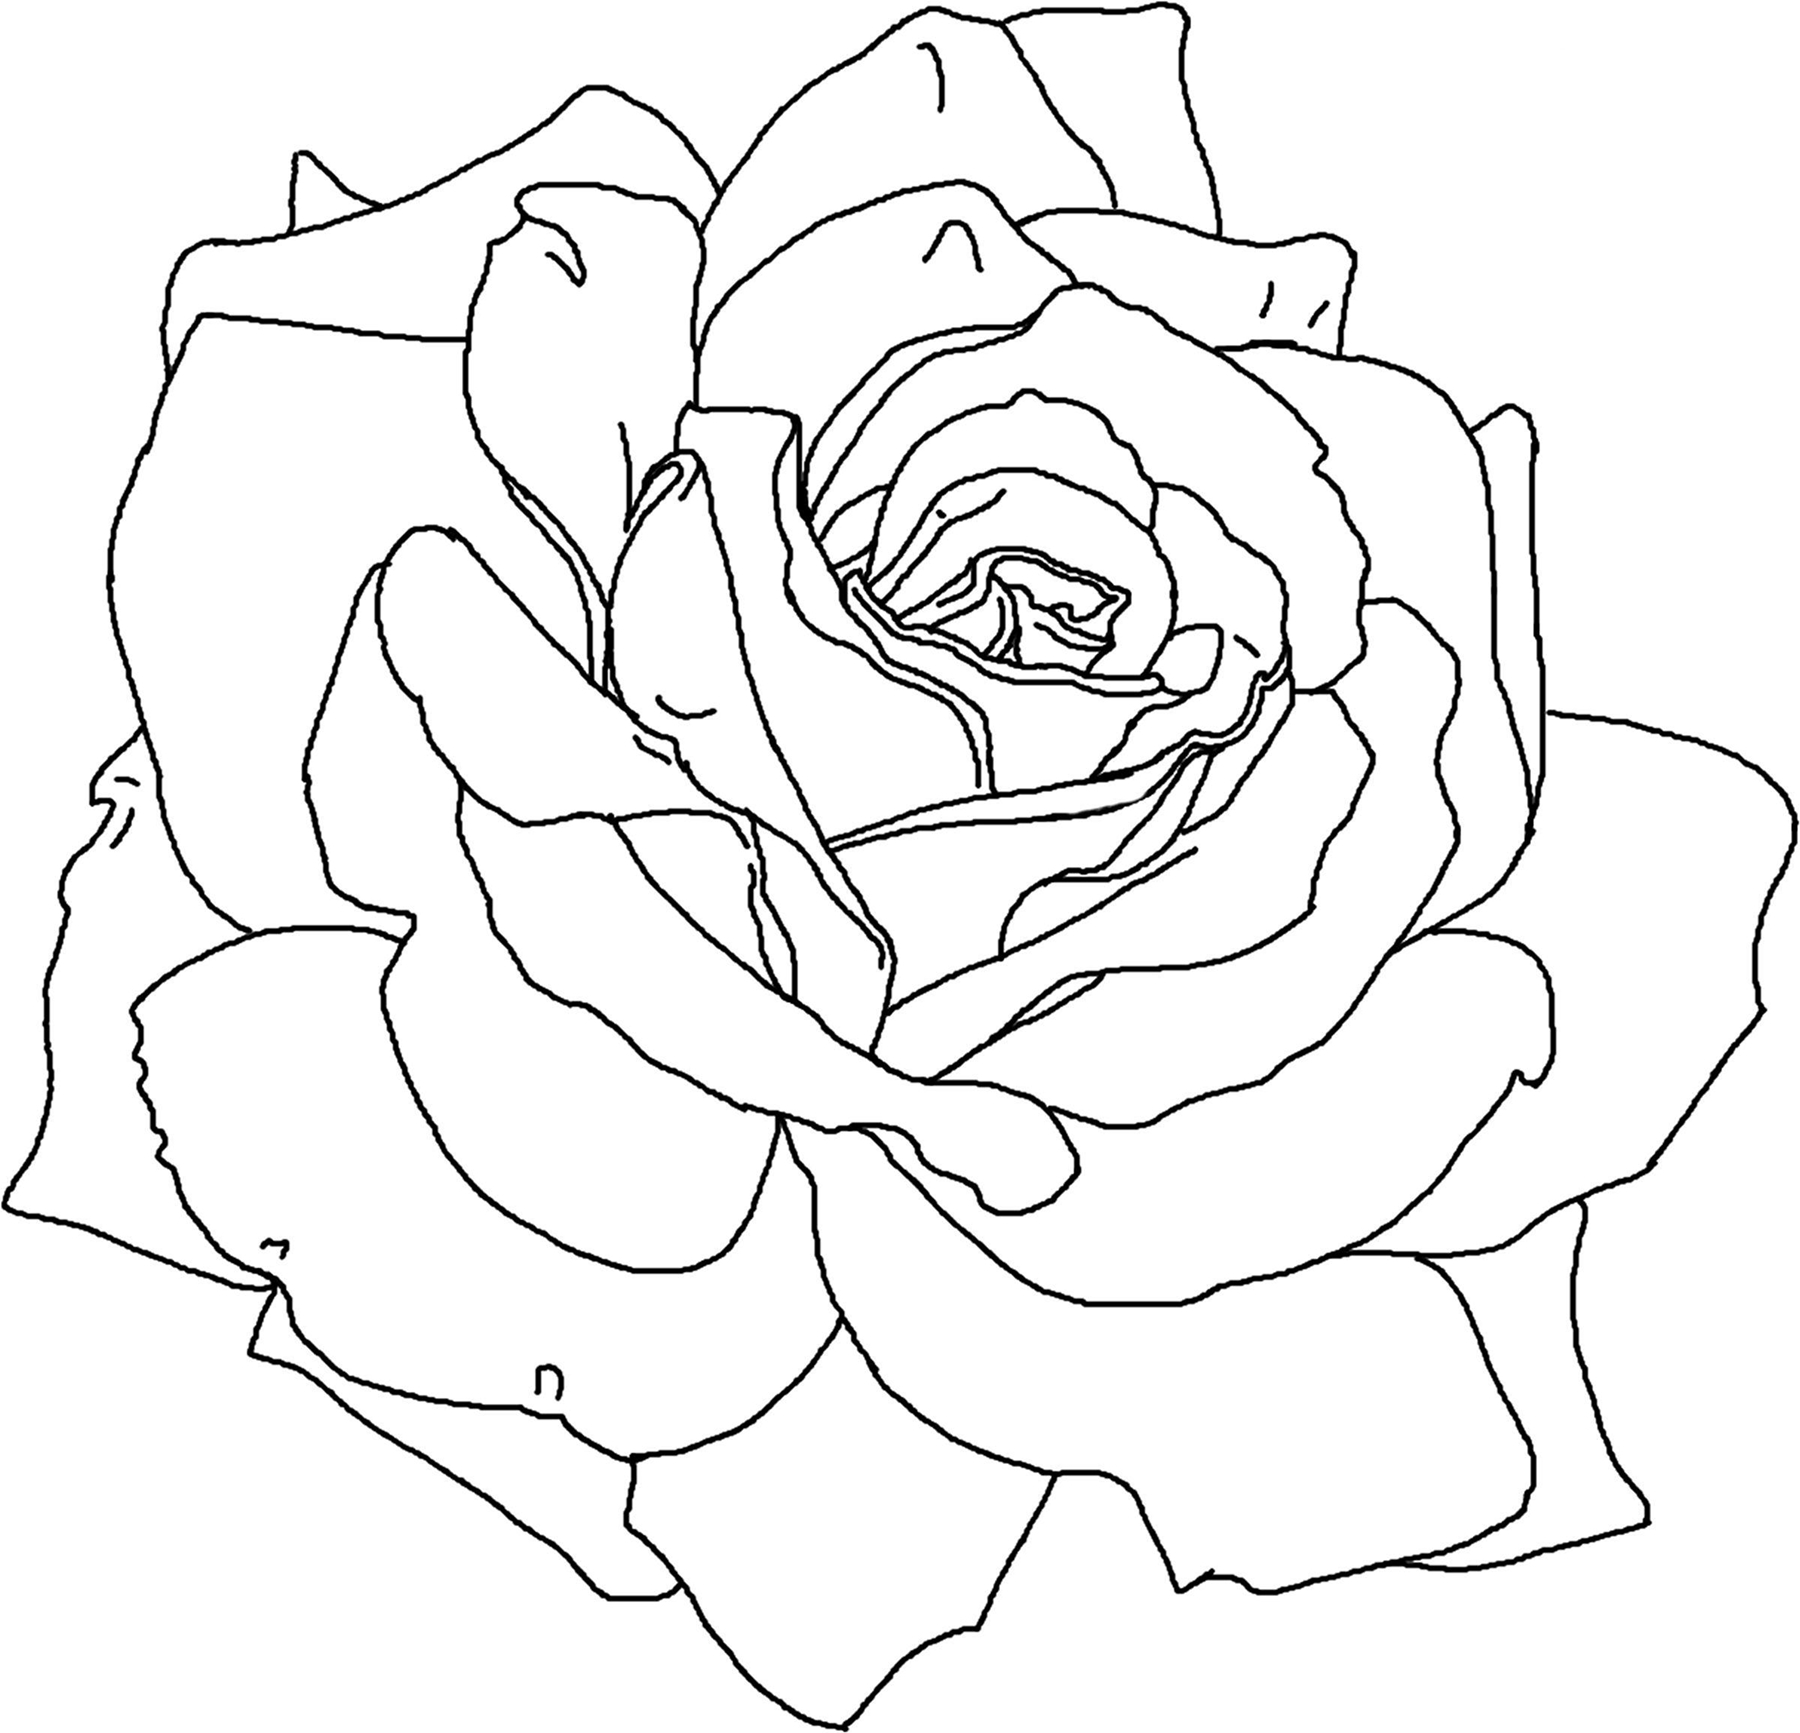 Free Printable Flower Coloring Pages For Kids - Best ...